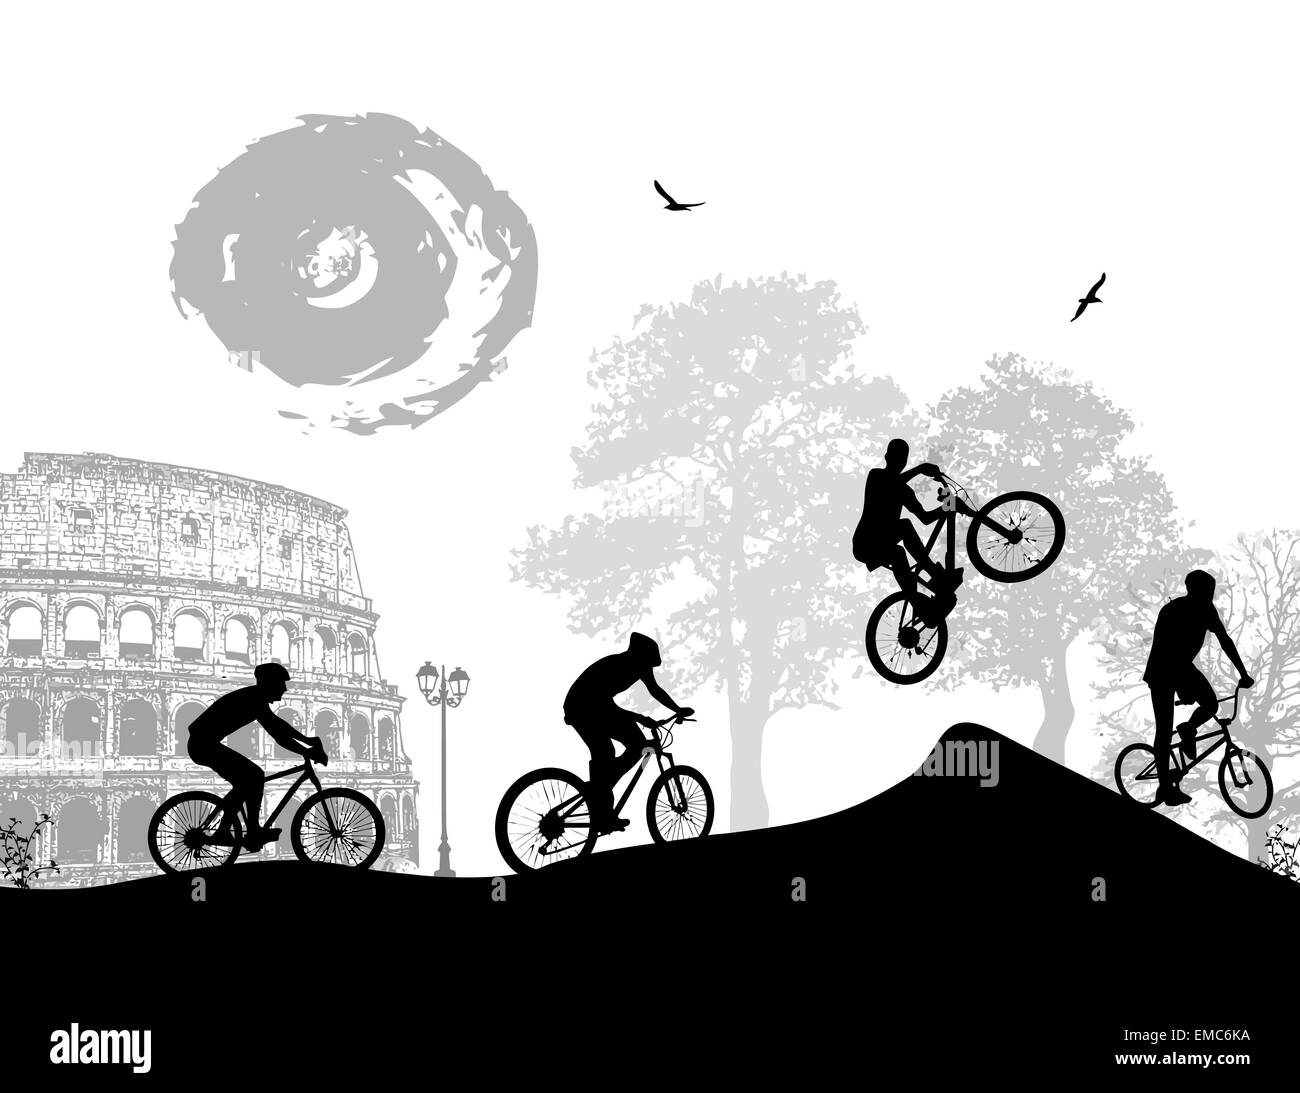 Bicycle riders at Rome Stock Vector